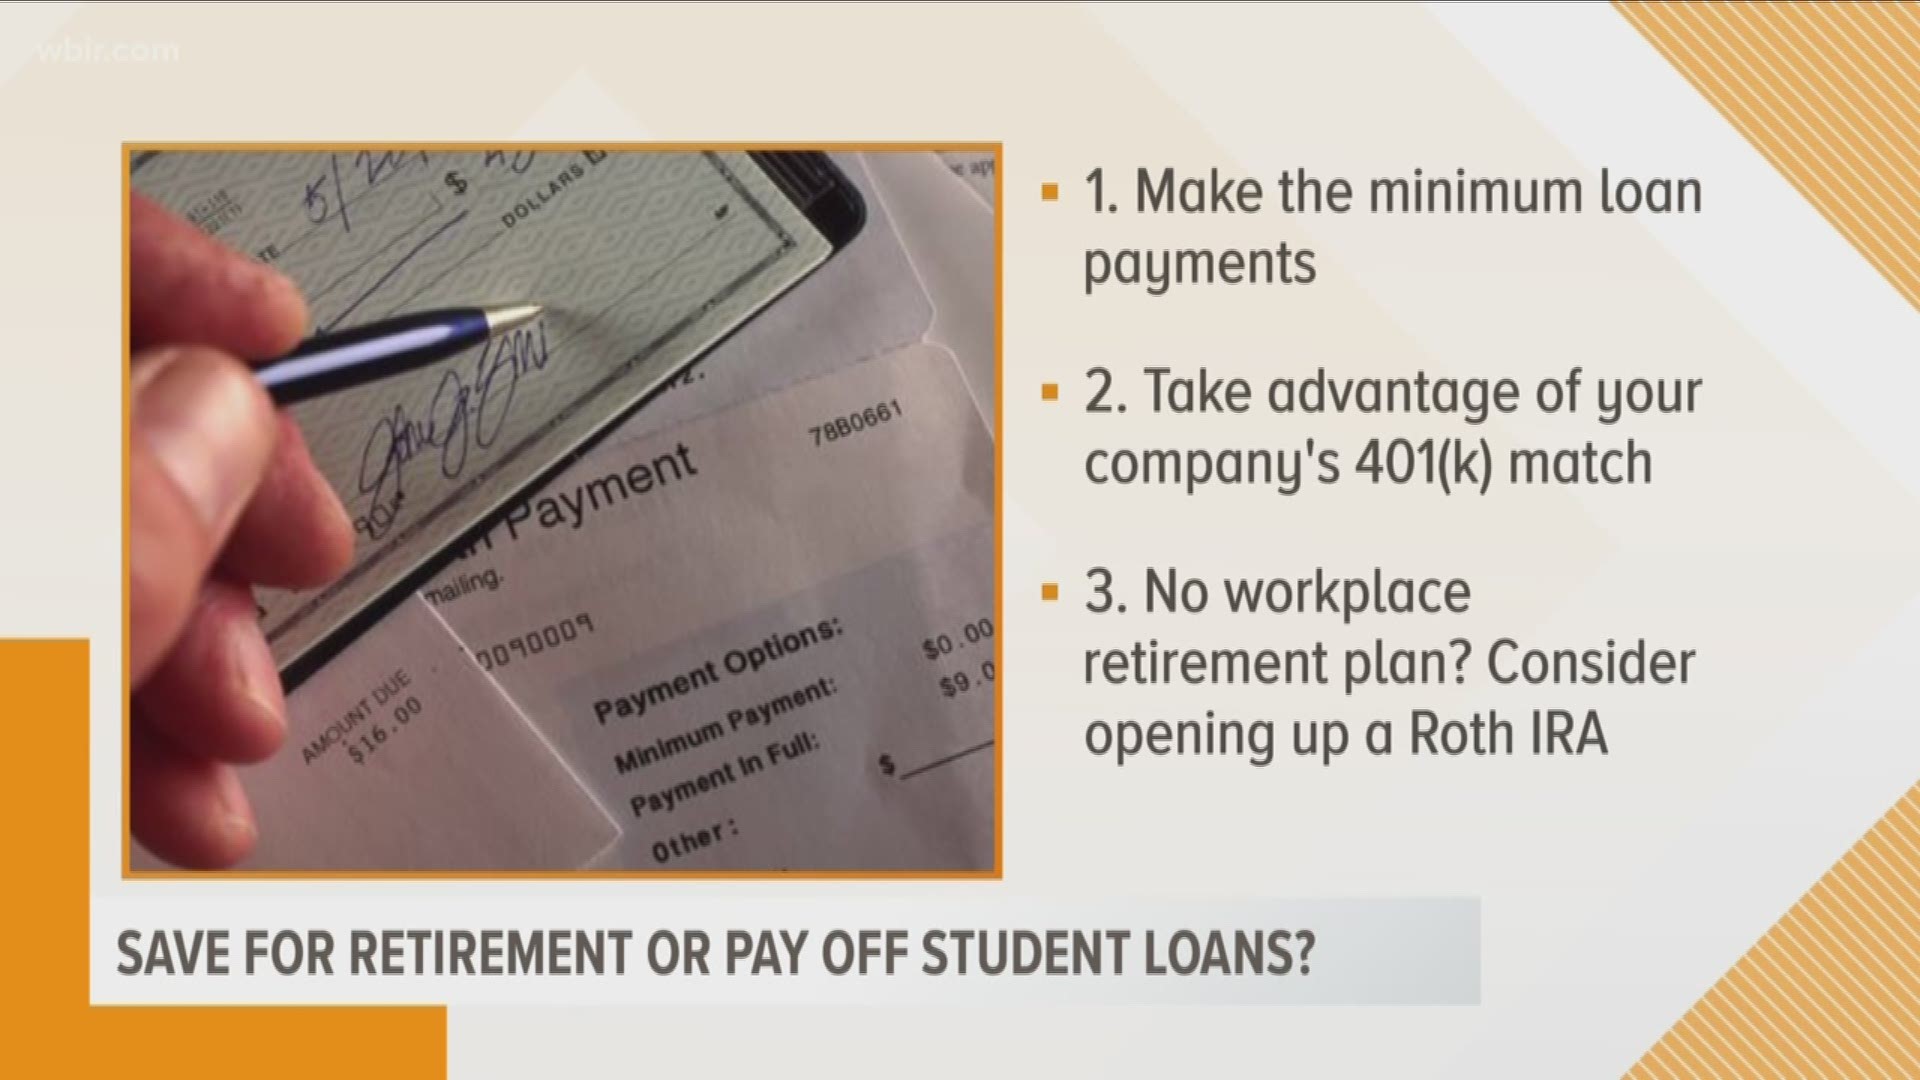 Money Man Paul Fain breaks down the tough decision between saving for retirement or paying off student loans.